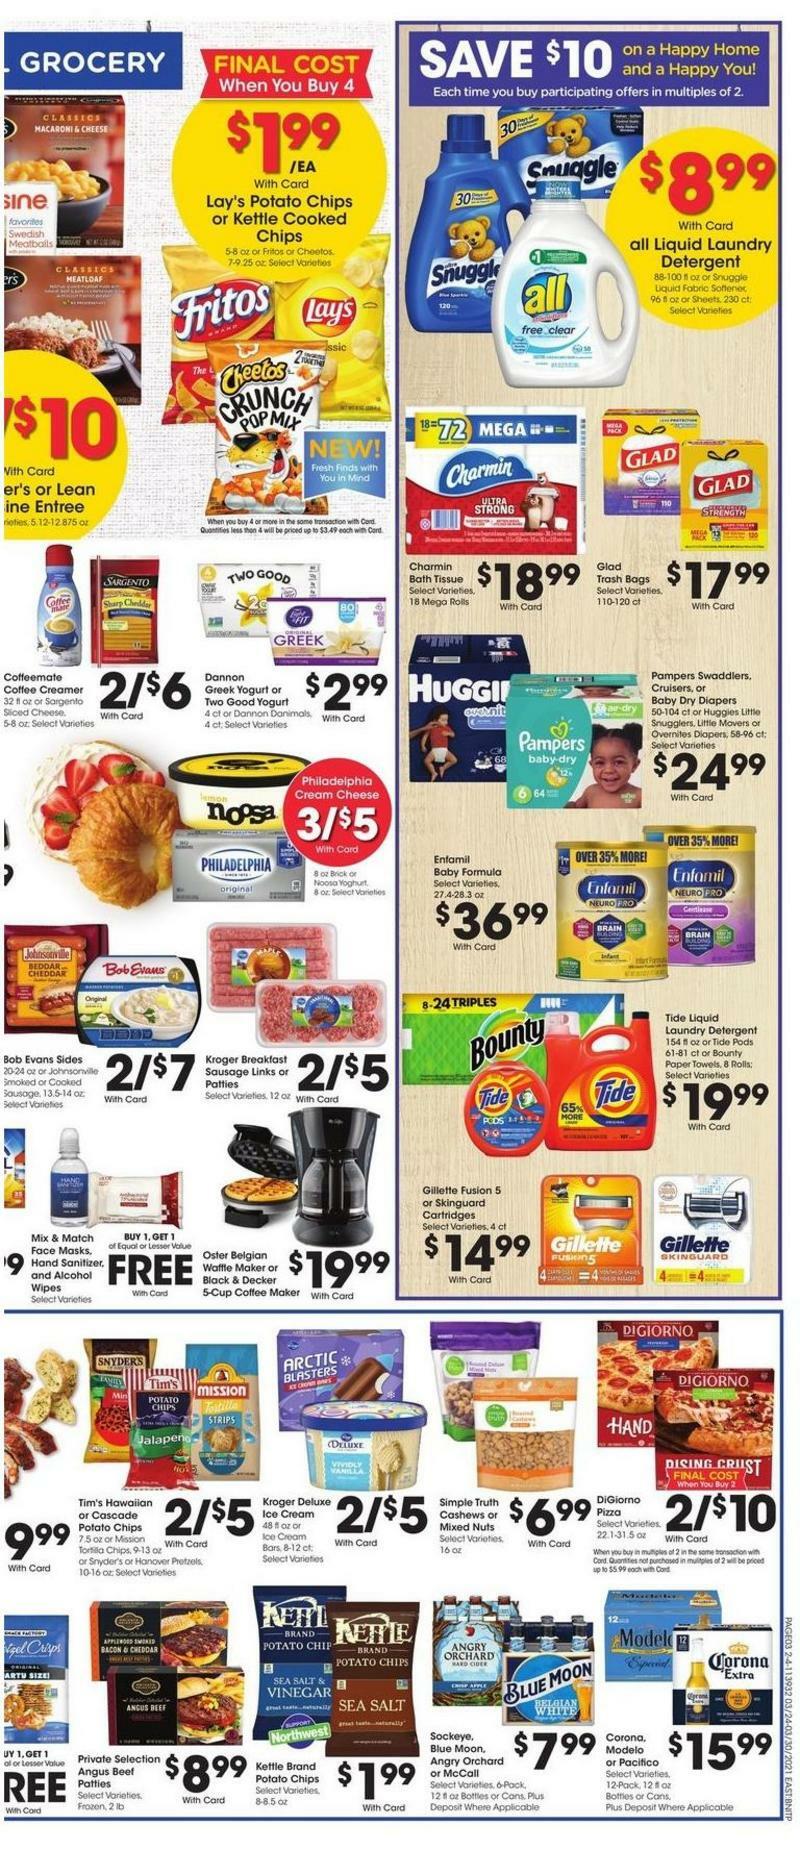 Fred Meyer Weekly Ad from March 24